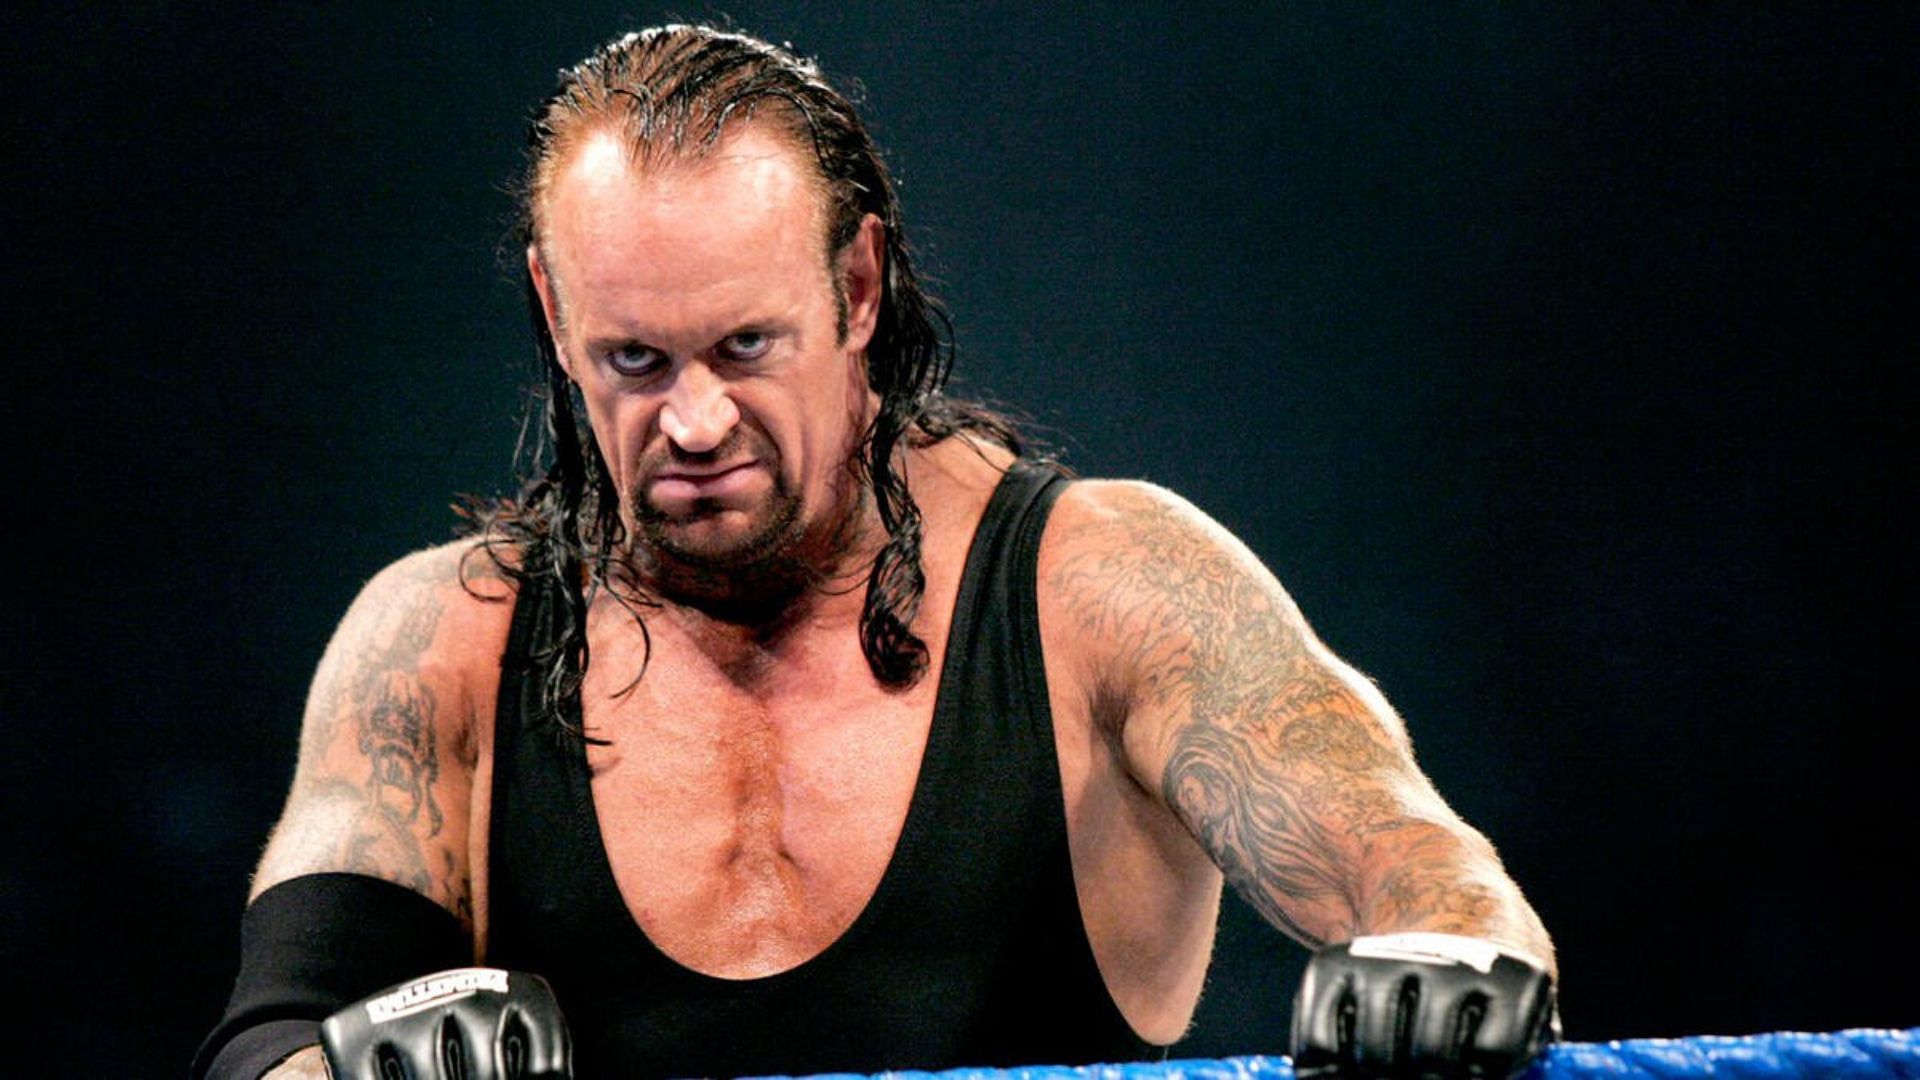 The Undertaker is a character who had no fears